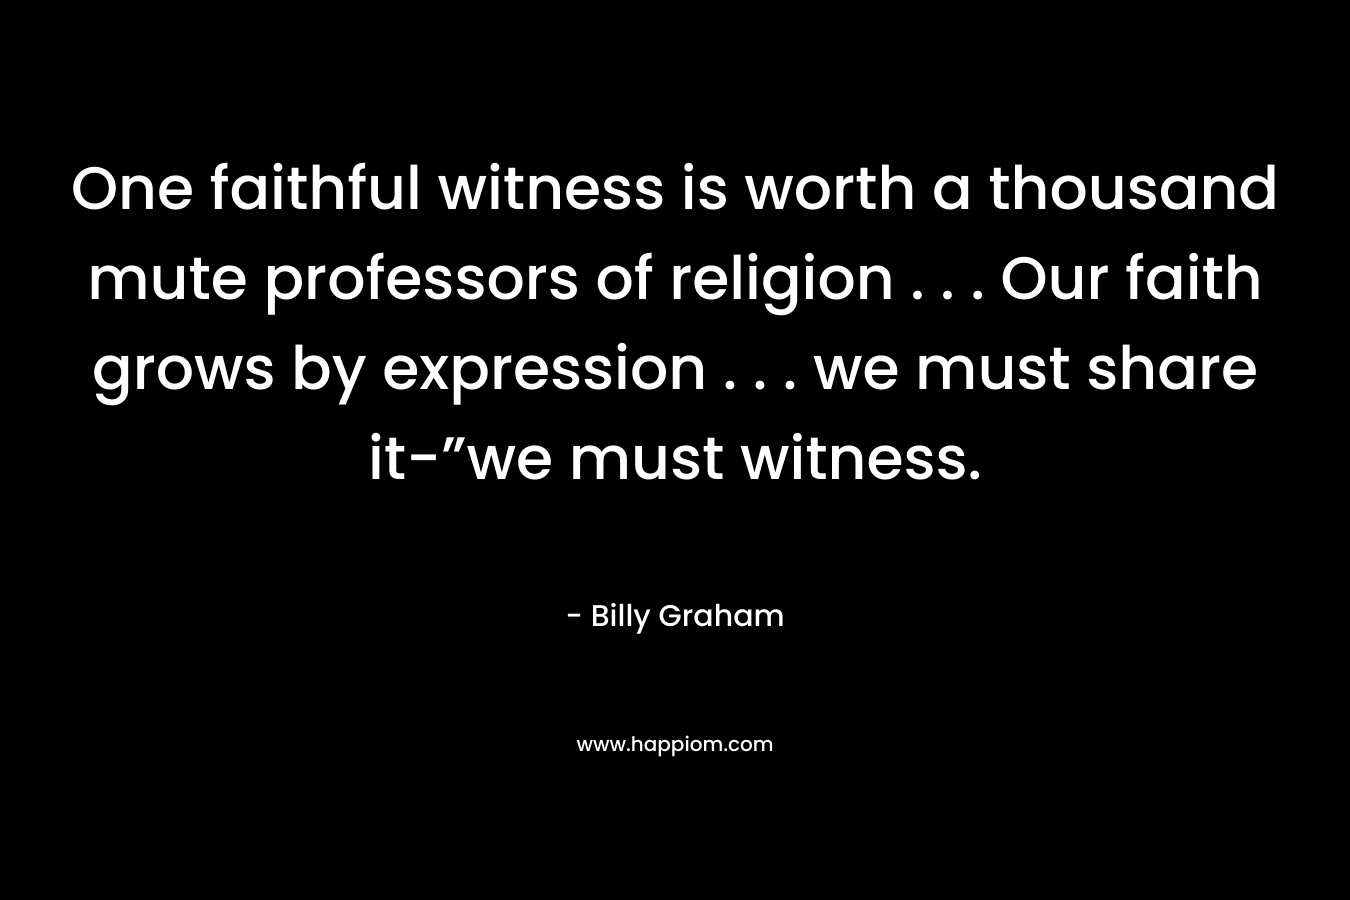 One faithful witness is worth a thousand mute professors of religion . . . Our faith grows by expression . . . we must share it-”we must witness. – Billy Graham